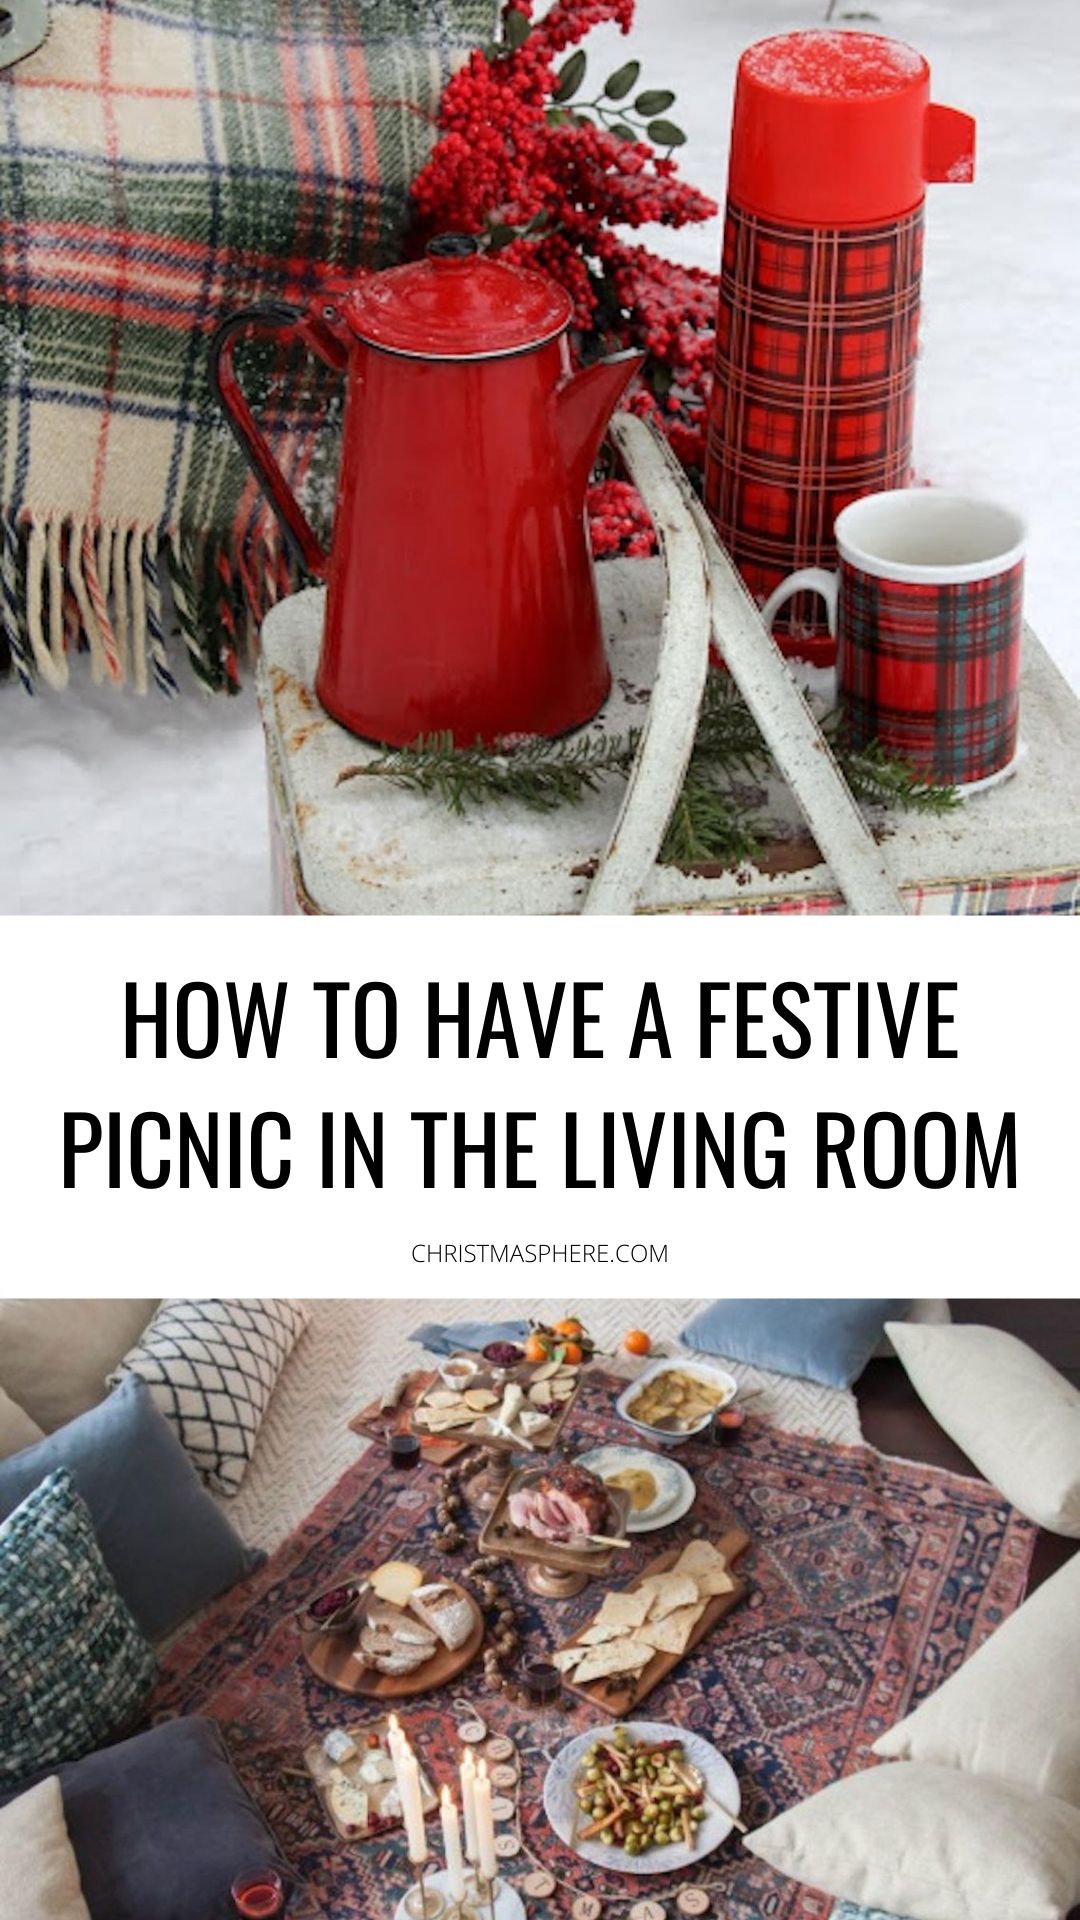 How to have a festive picnic in the living room